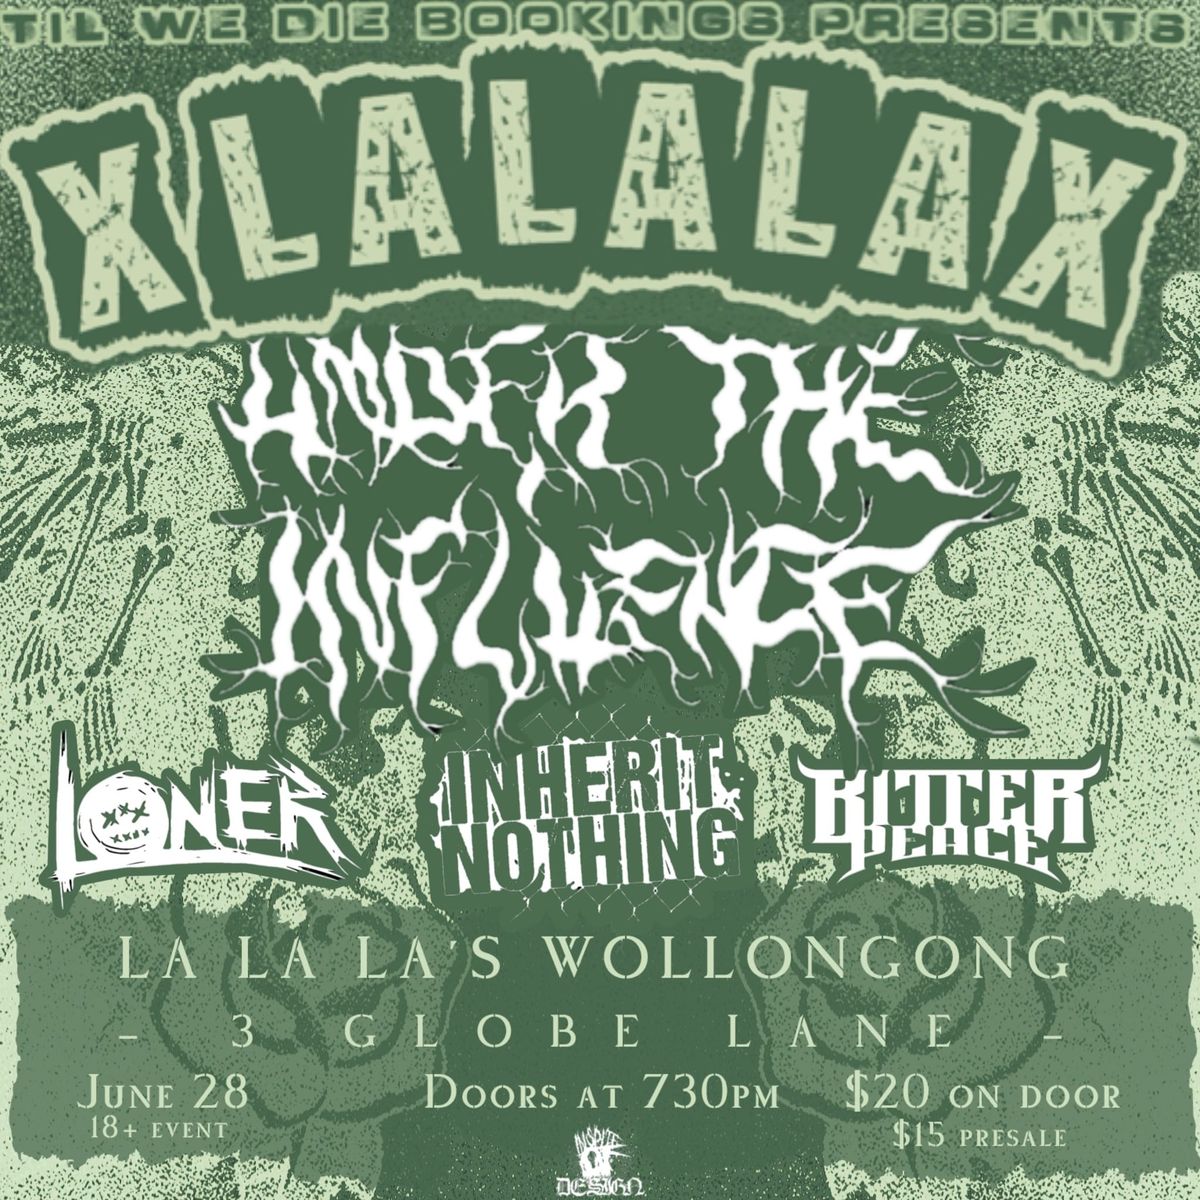 XLaLaLaX: Under The Influence, Loner, Inherit Nothing and Bitter Peace 